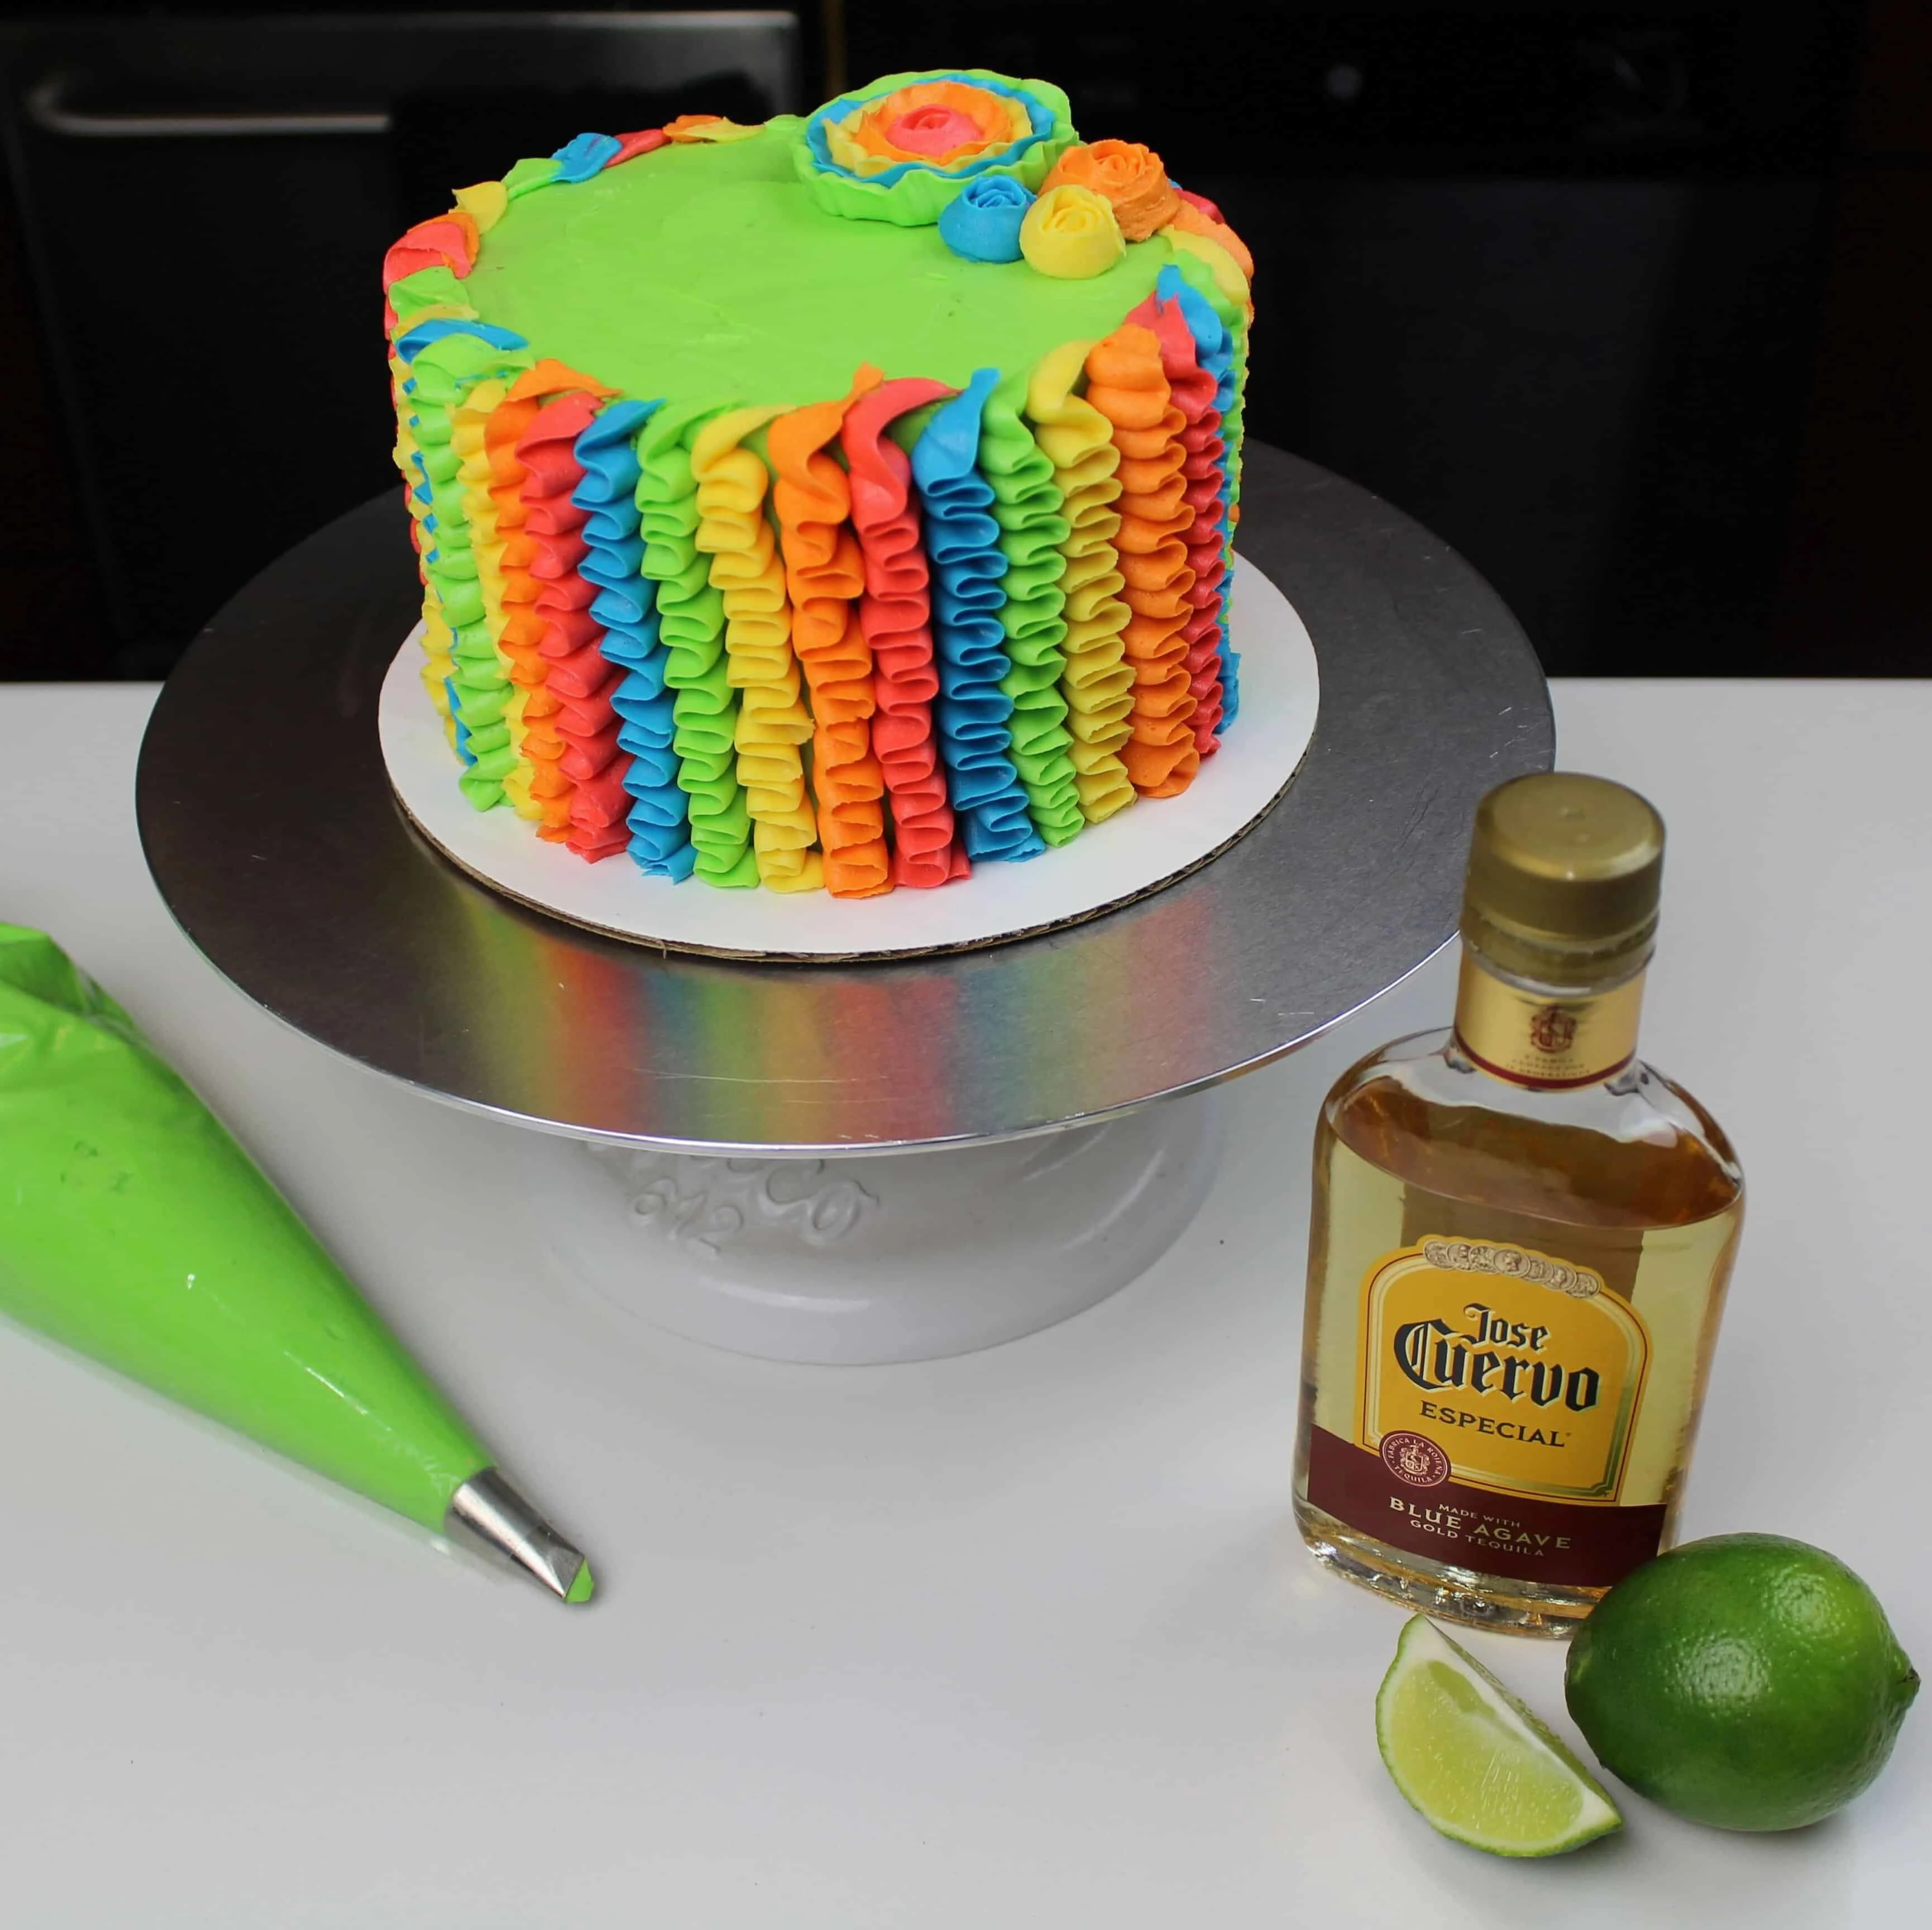 uncut tequila lime cake decorated with buttercream ruffles